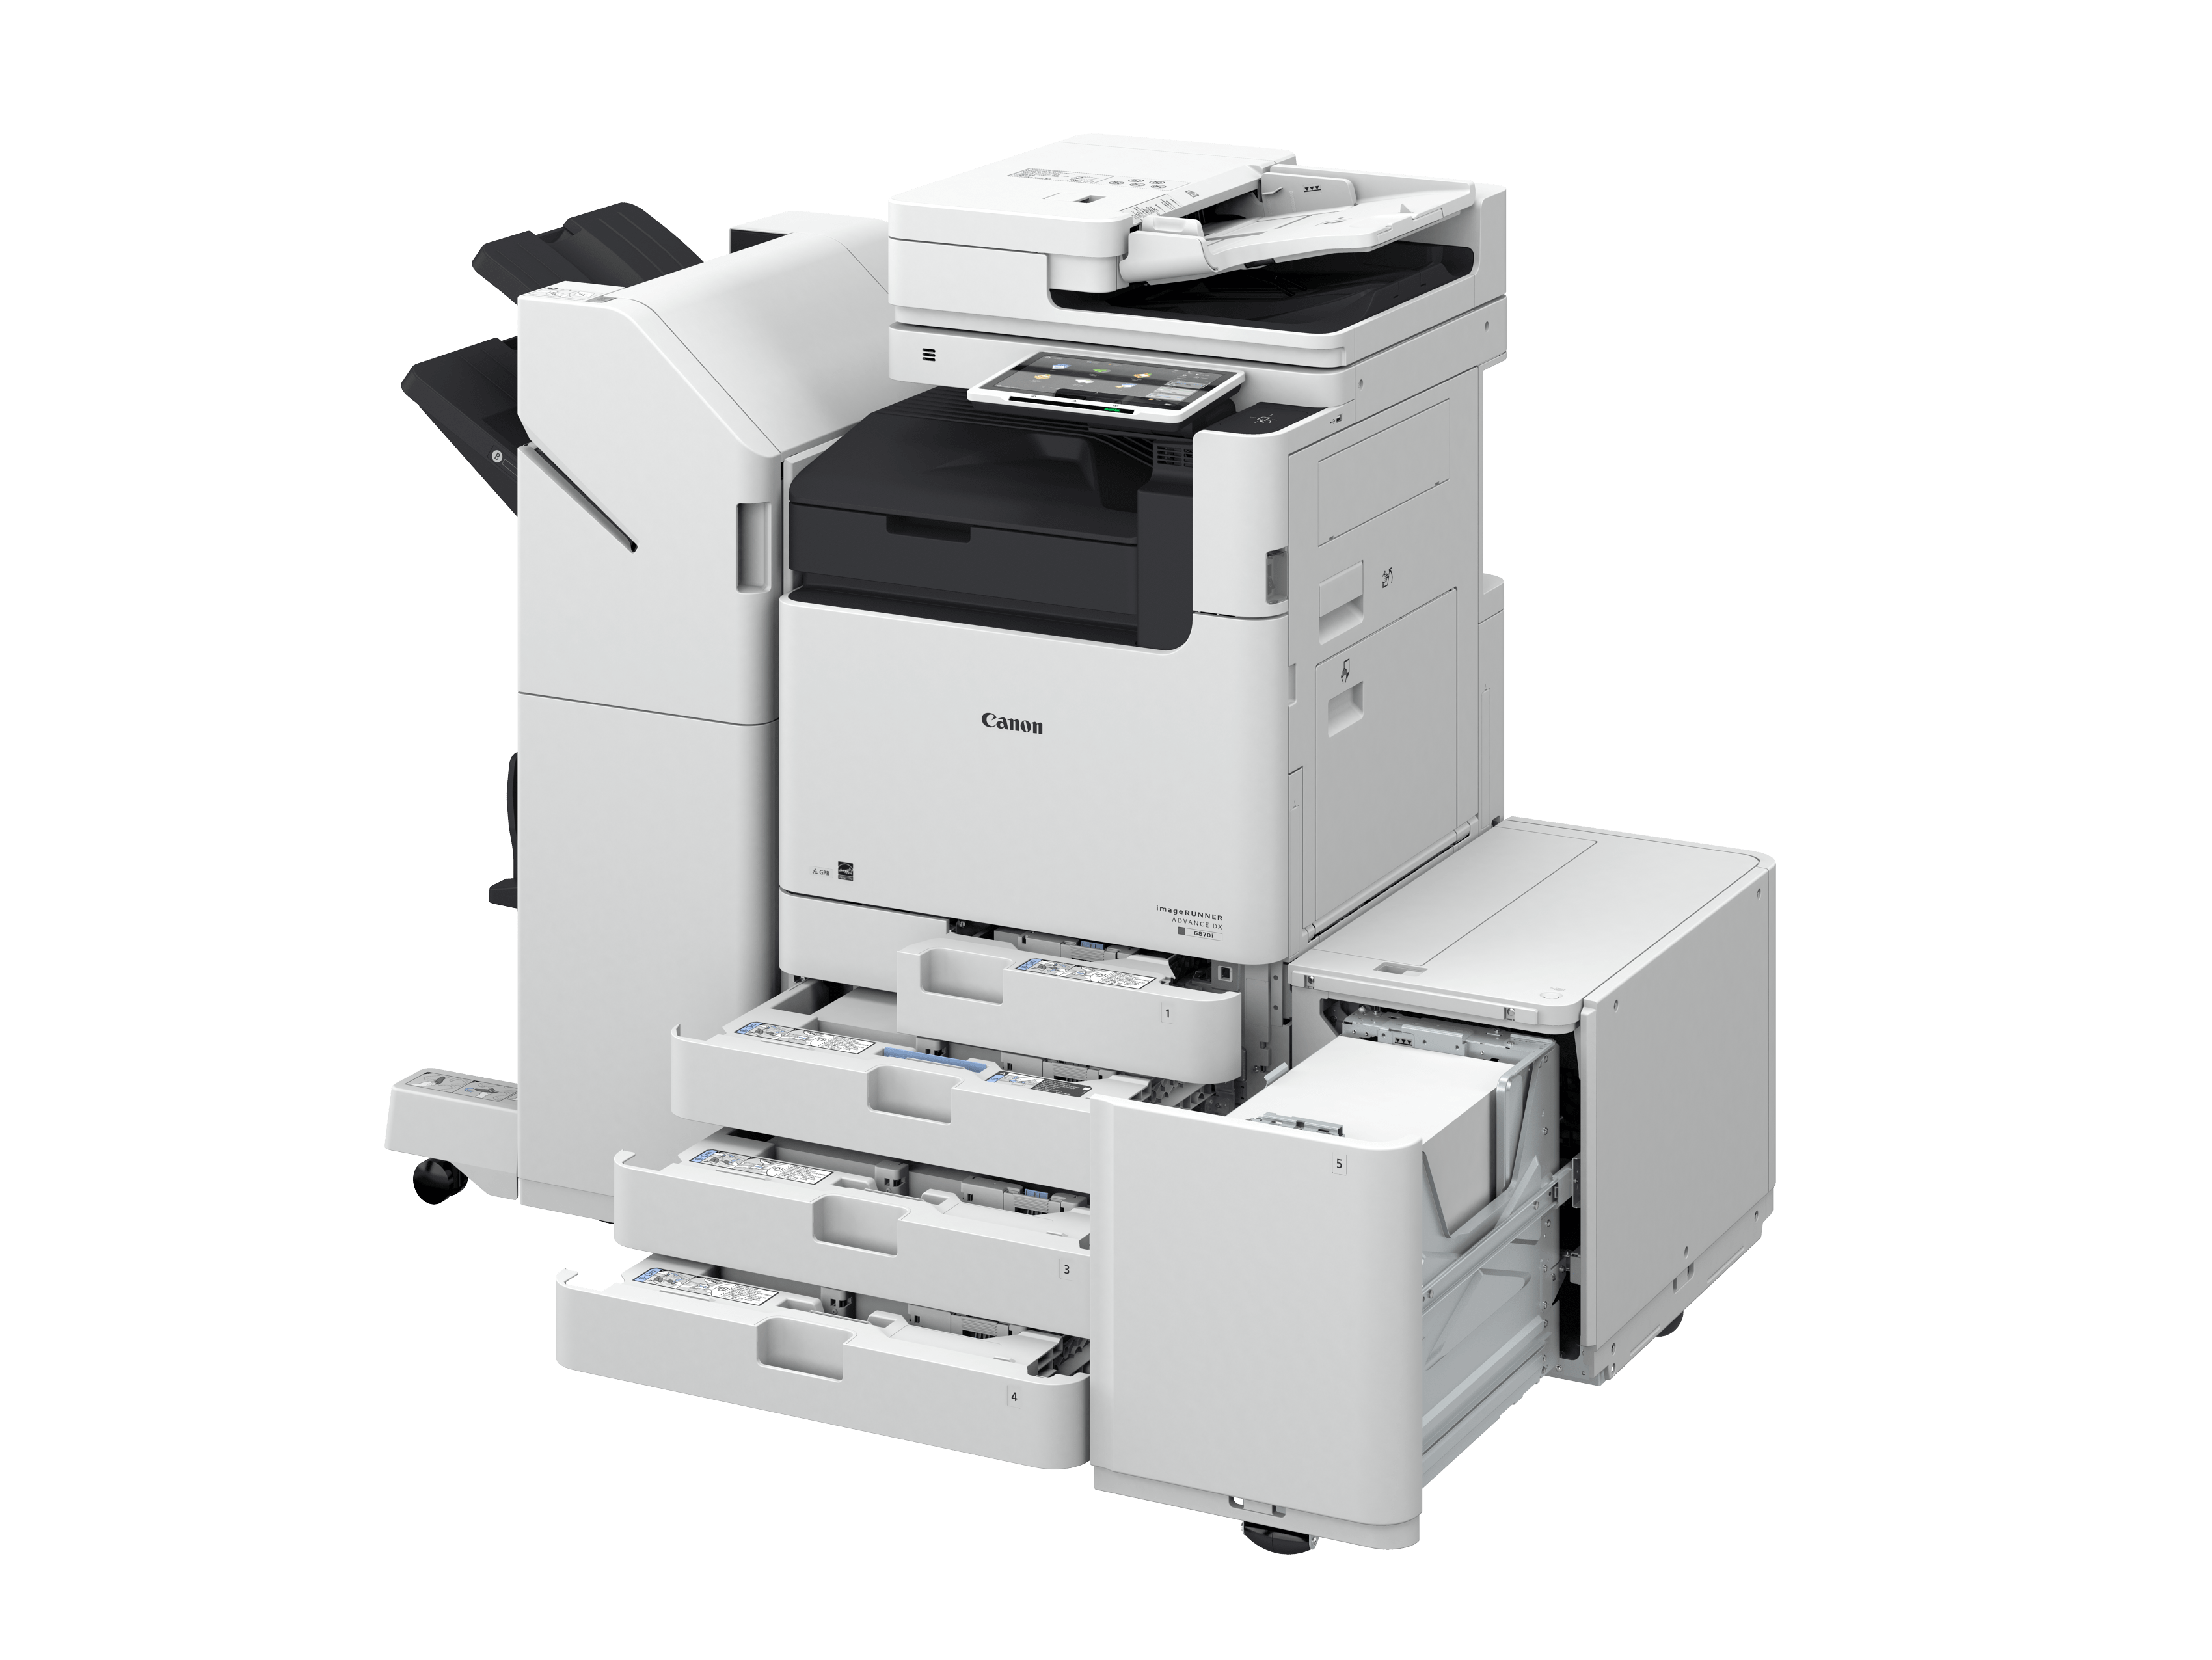 Absolute Toner New Repossessed Canon imageRUNNER ADVANCE DX 6870i Multifunction Black and White Business Printer and Copier Printers/Copiers